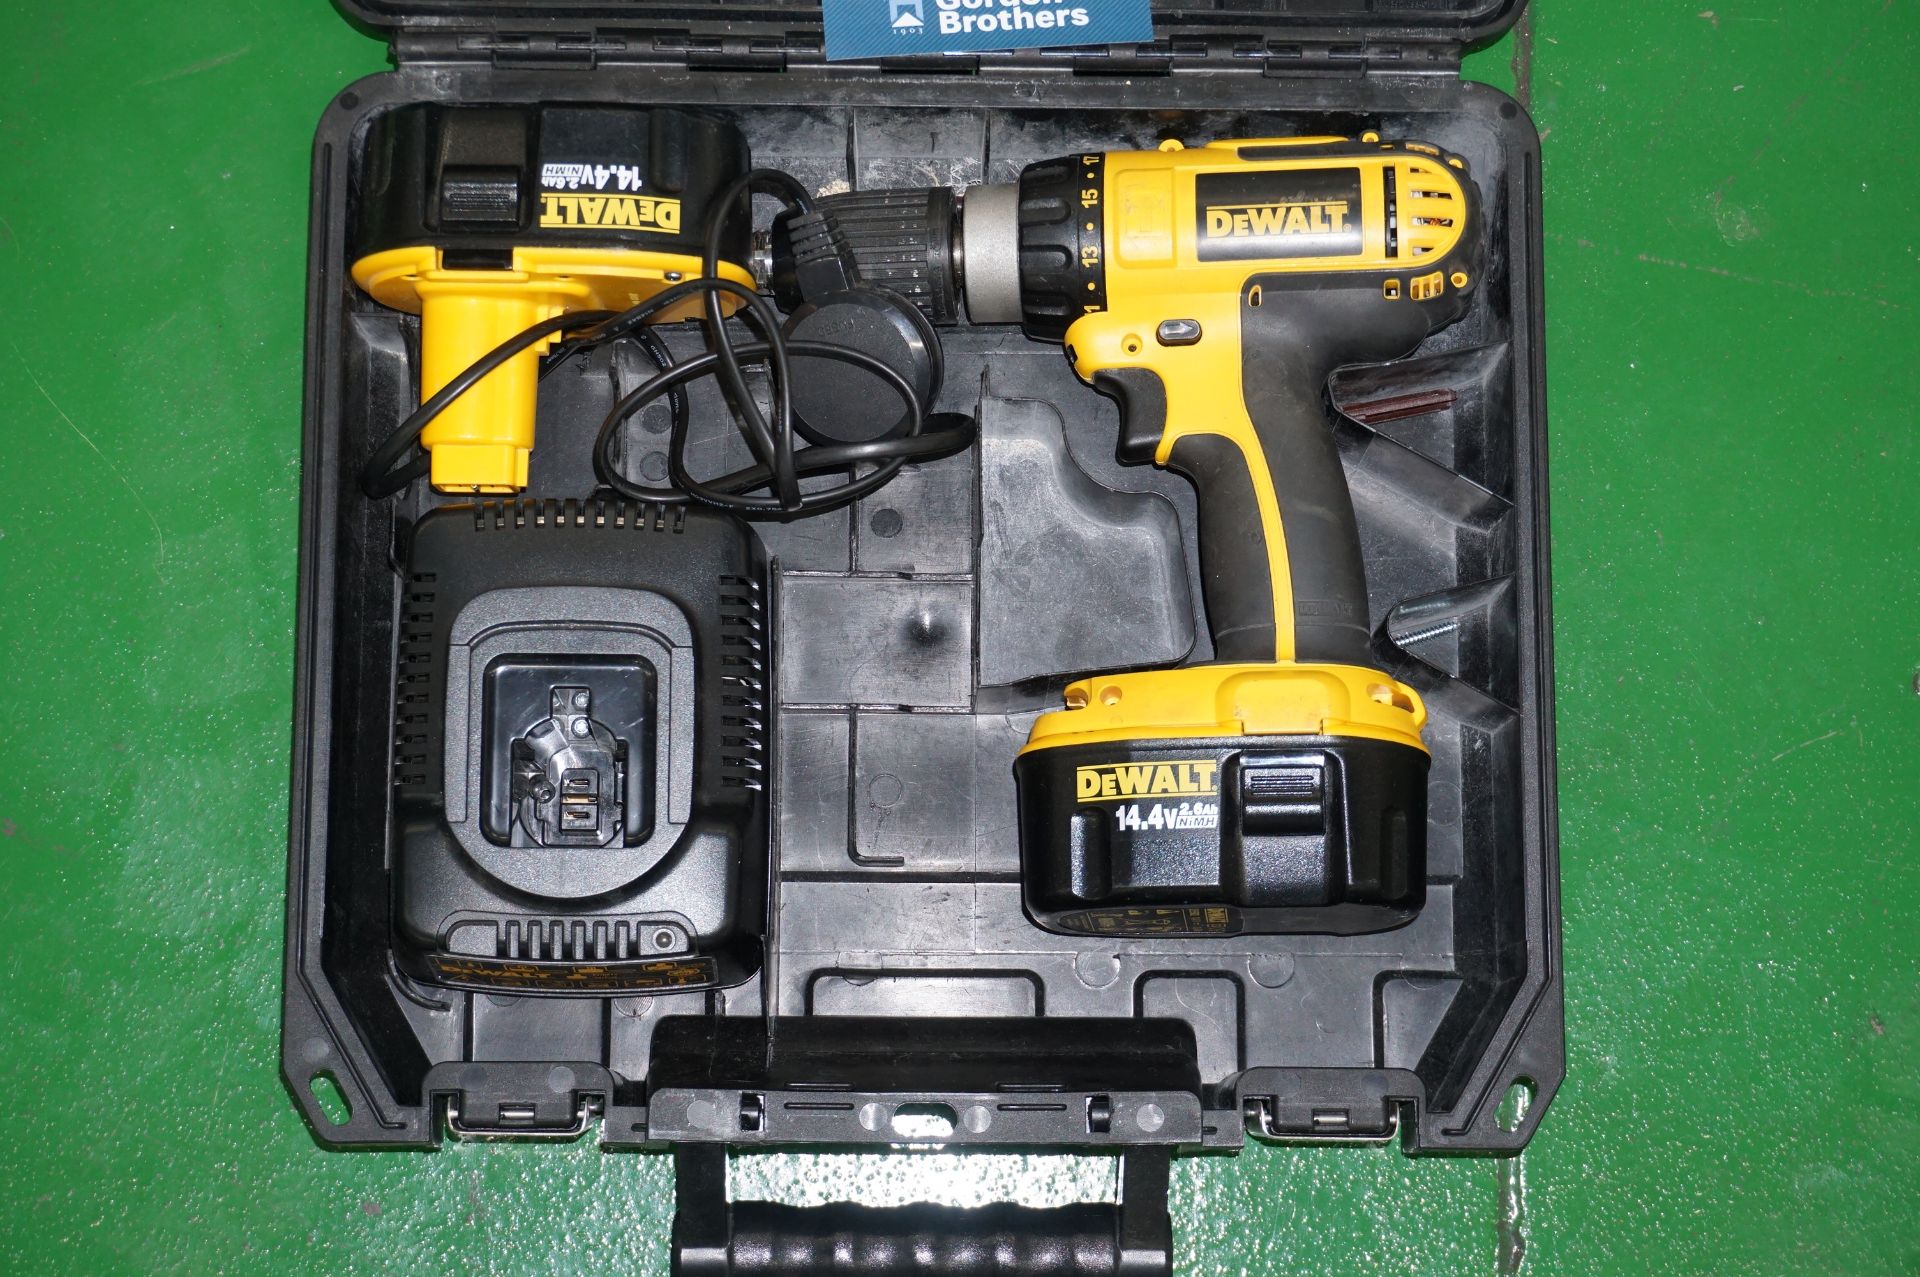 Dewalt unknown model cordless hand drill with charging dock, spare battery and carry case - Image 2 of 2